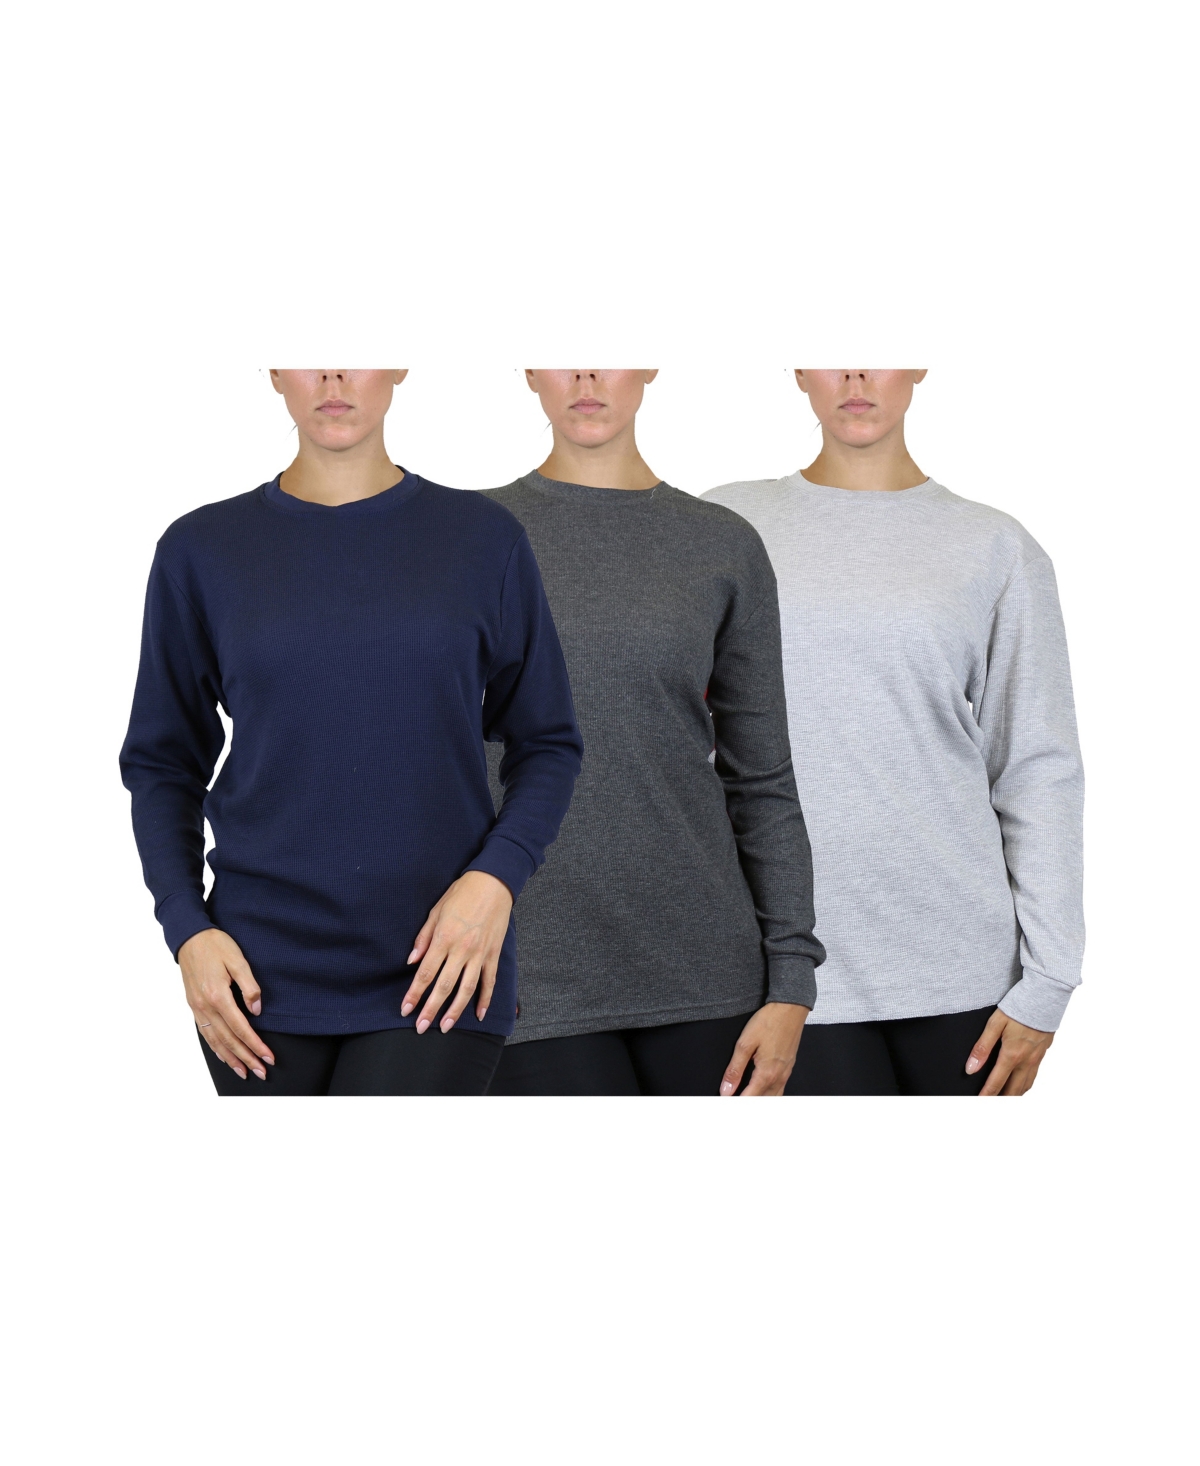 Women's Loose Fit Waffle Knit Thermal Shirt, Pack of 3 - Navy, Olive, Burgundy